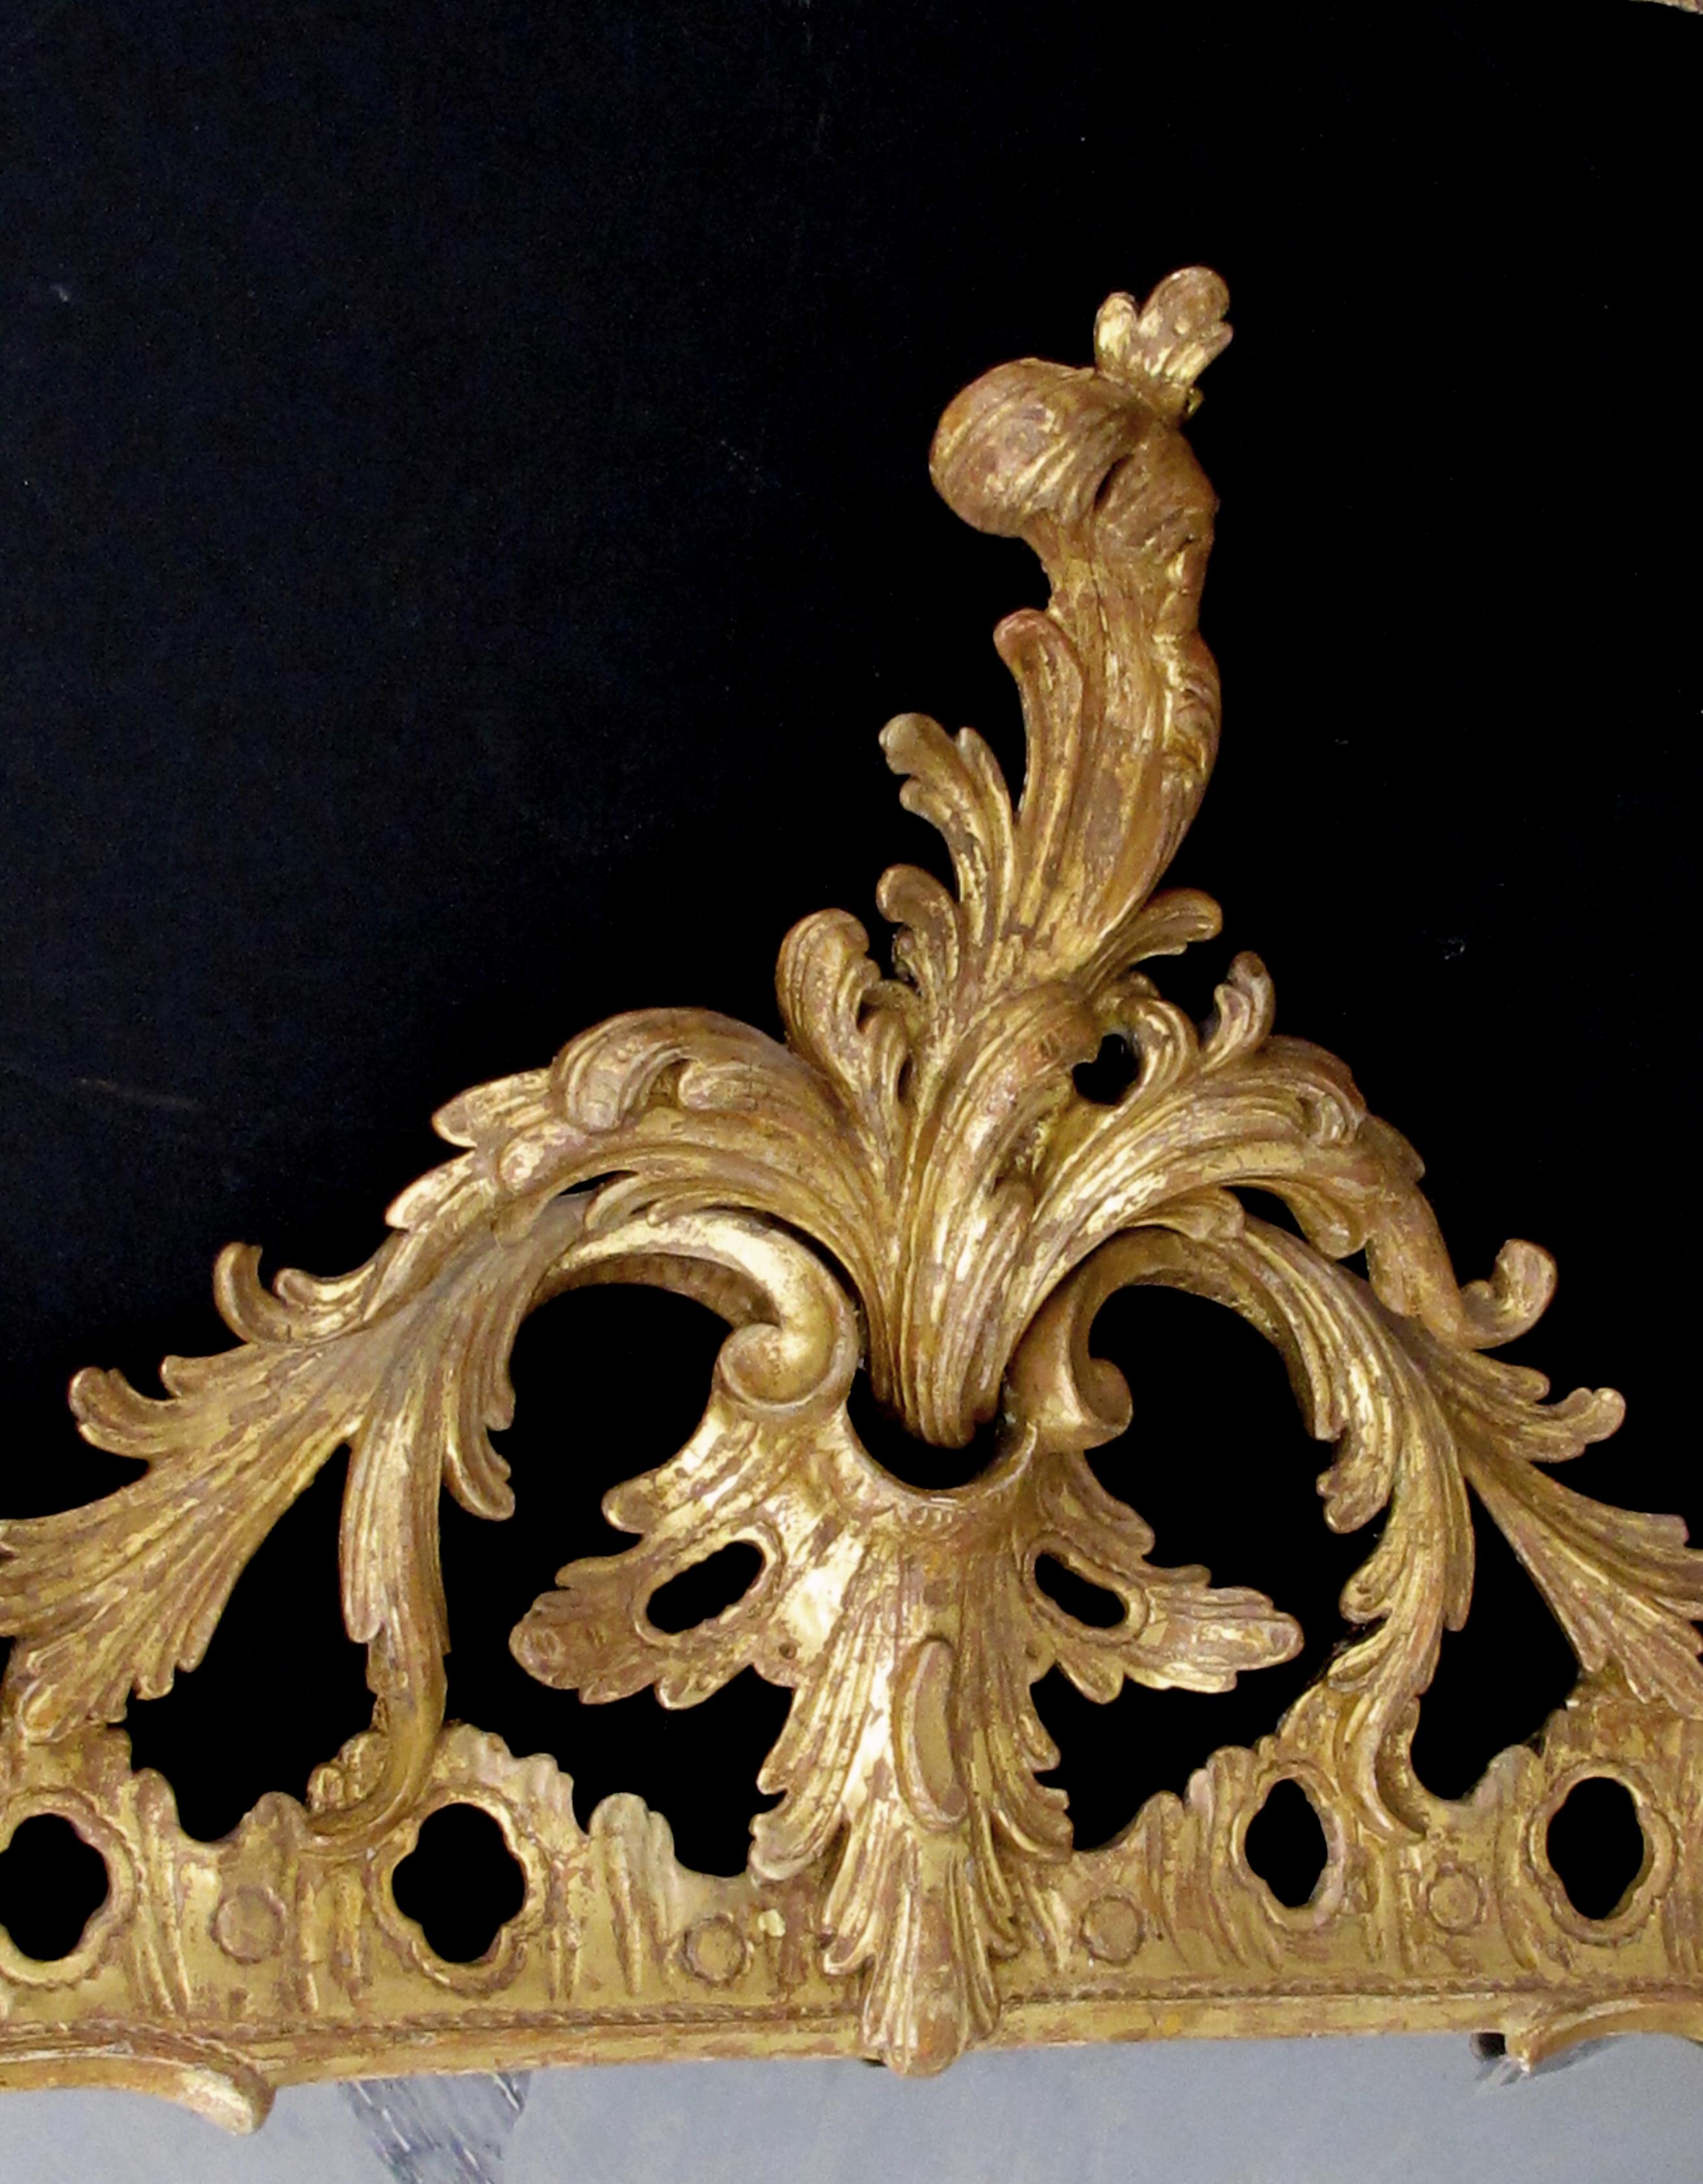 An elegant and superbly carved English George II giltwood mirror with elaborate foliate crest; the finely-carved reticulated frame with exuberant foliate crest; the frame adorned with lively c-scrolls, rocaille and floral motifs; later antique